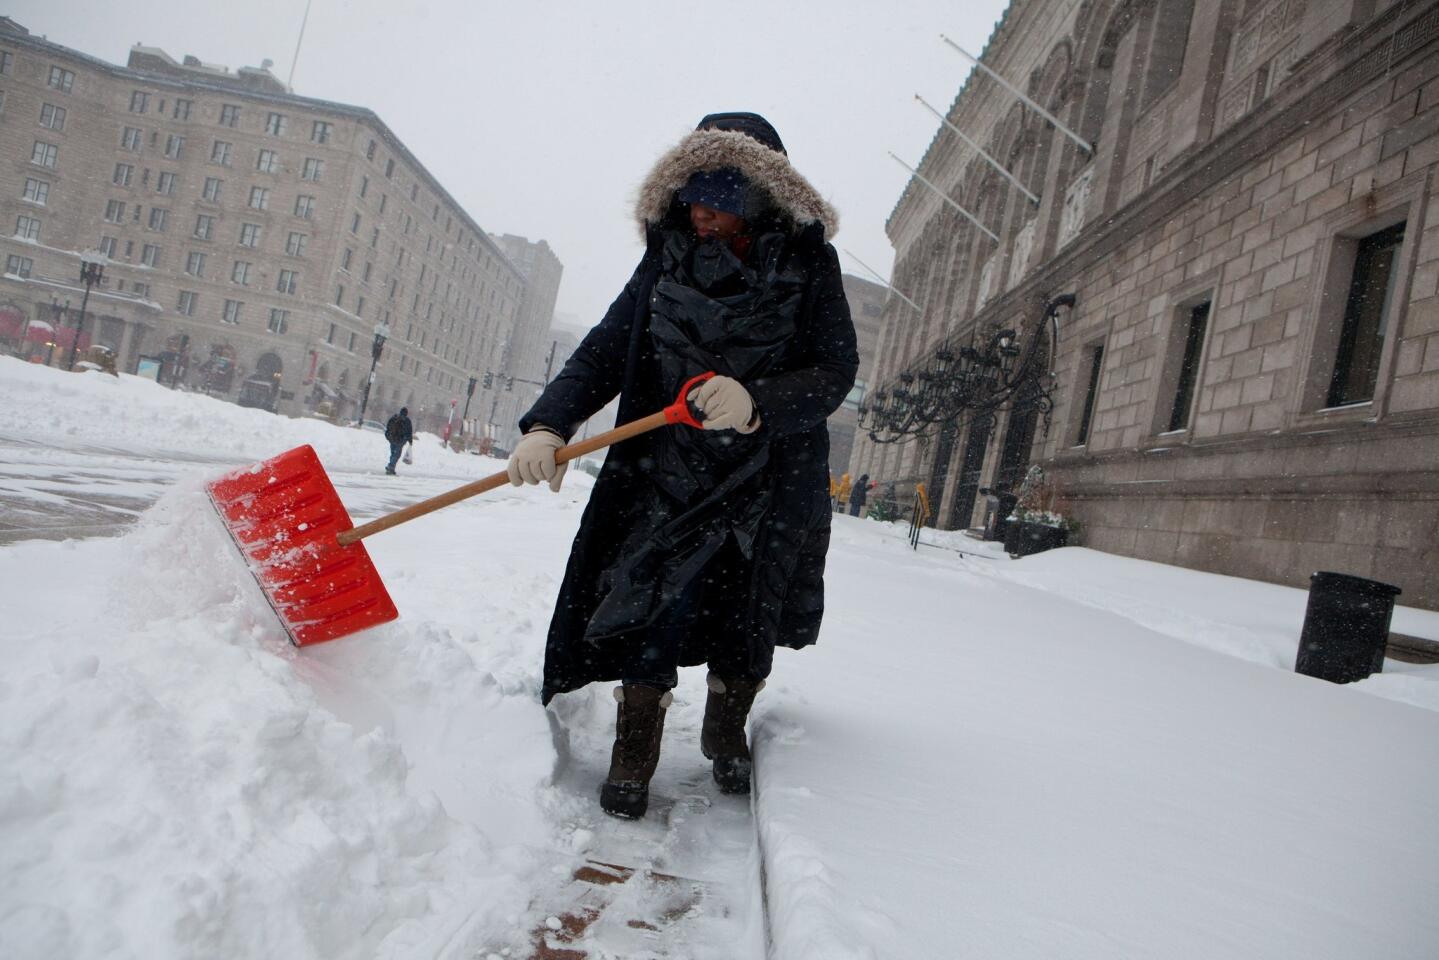 A library employee works to clear the sidewalks in front of the main branch of the Boston Public Library in Boston on Tuesday.